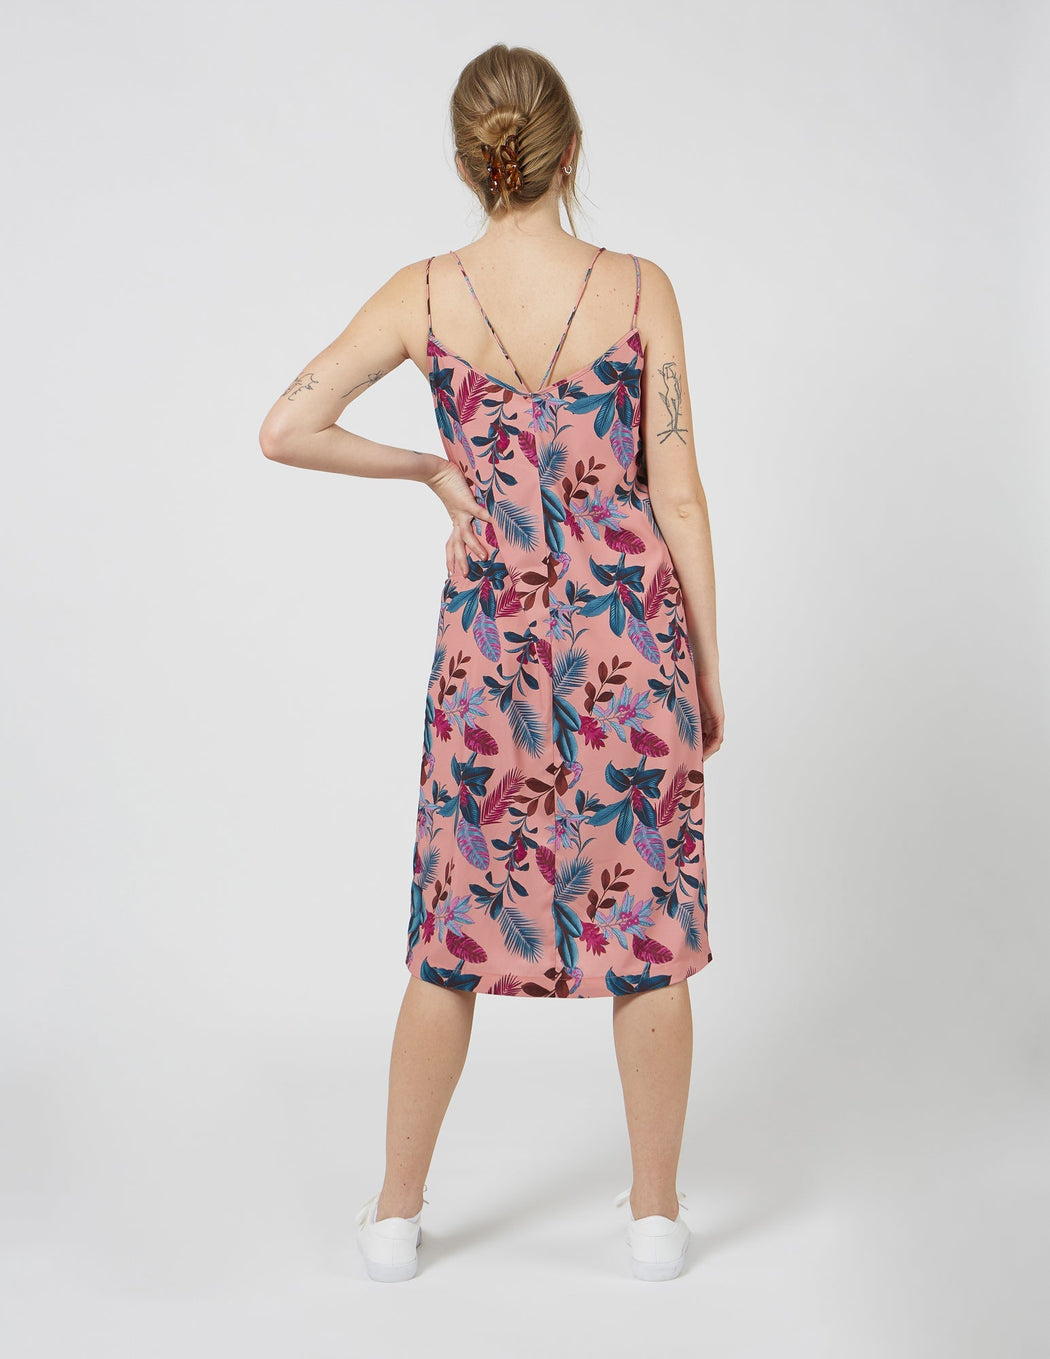 Women's Lightweight TIWI Dress - Recycled Polyester | FIG Clothing